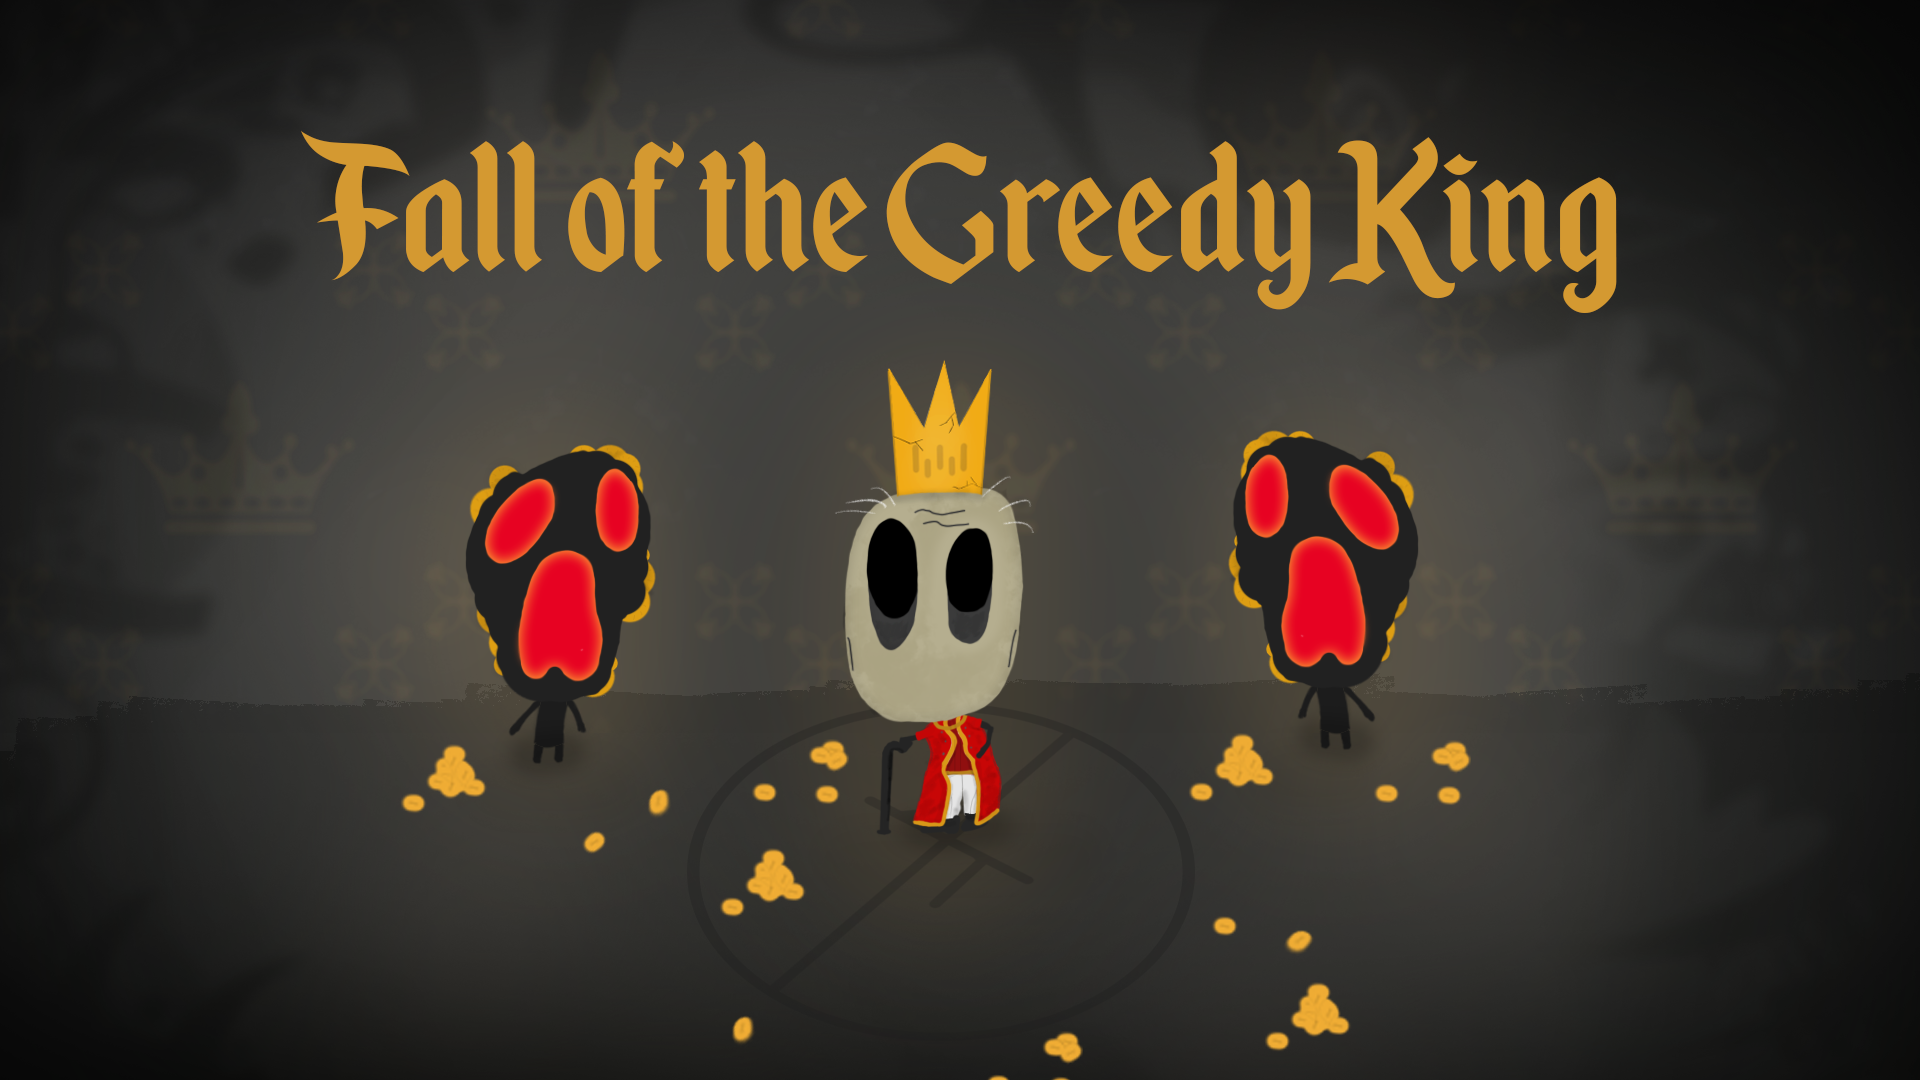 Fall of the Greedy King